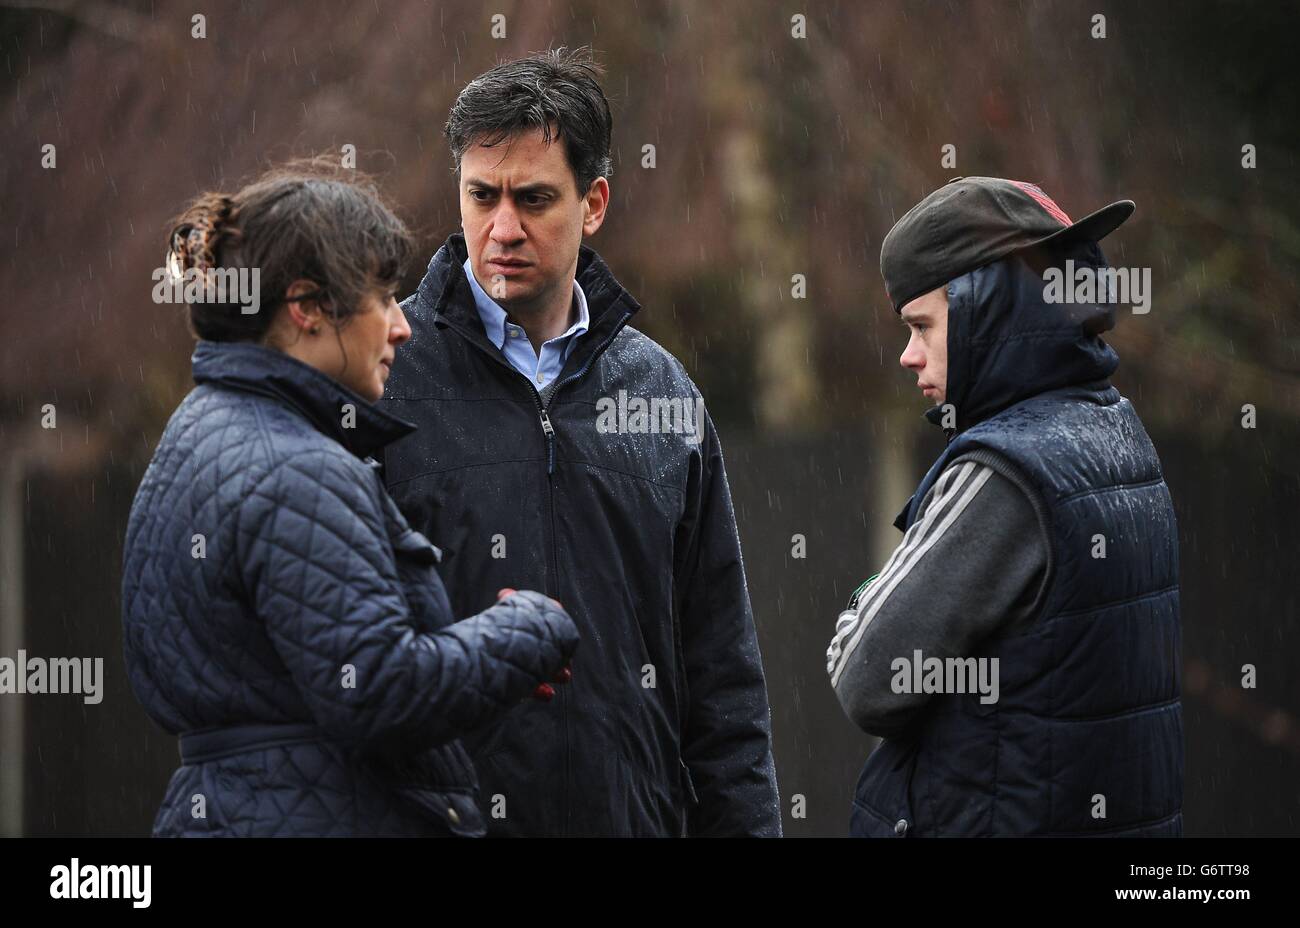 Labour leader Ed Miliband (right) and Labour's Parliamentary Candidate for Reading West, Victoria Groulef (left), speak with a local resident during a visit to the view recent flooding in Purley on Thames in Berkshire. Stock Photo